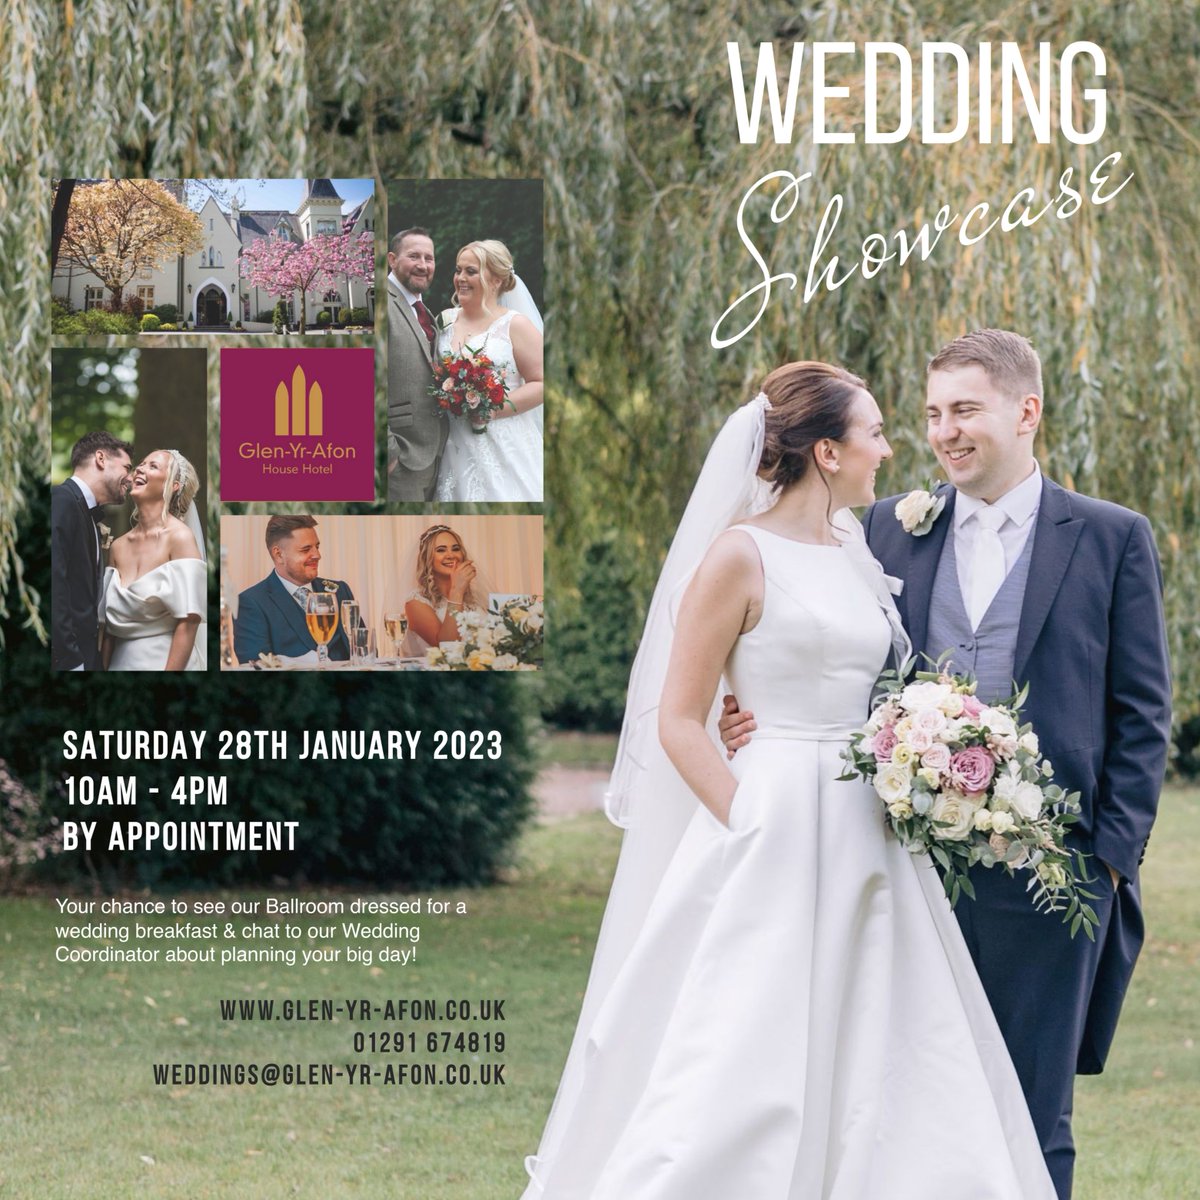 Newly engaged? We are now booking appointments for our next #weddingshowcase #weddingvenuesouthwales #countryhousehotel #usk #weddingpackages2023 #weddings2023 #gettingmarried #bride #groom #wedding #weddingday #weddingvenue #weddinginspo #weddingplanner #weddinginspiration